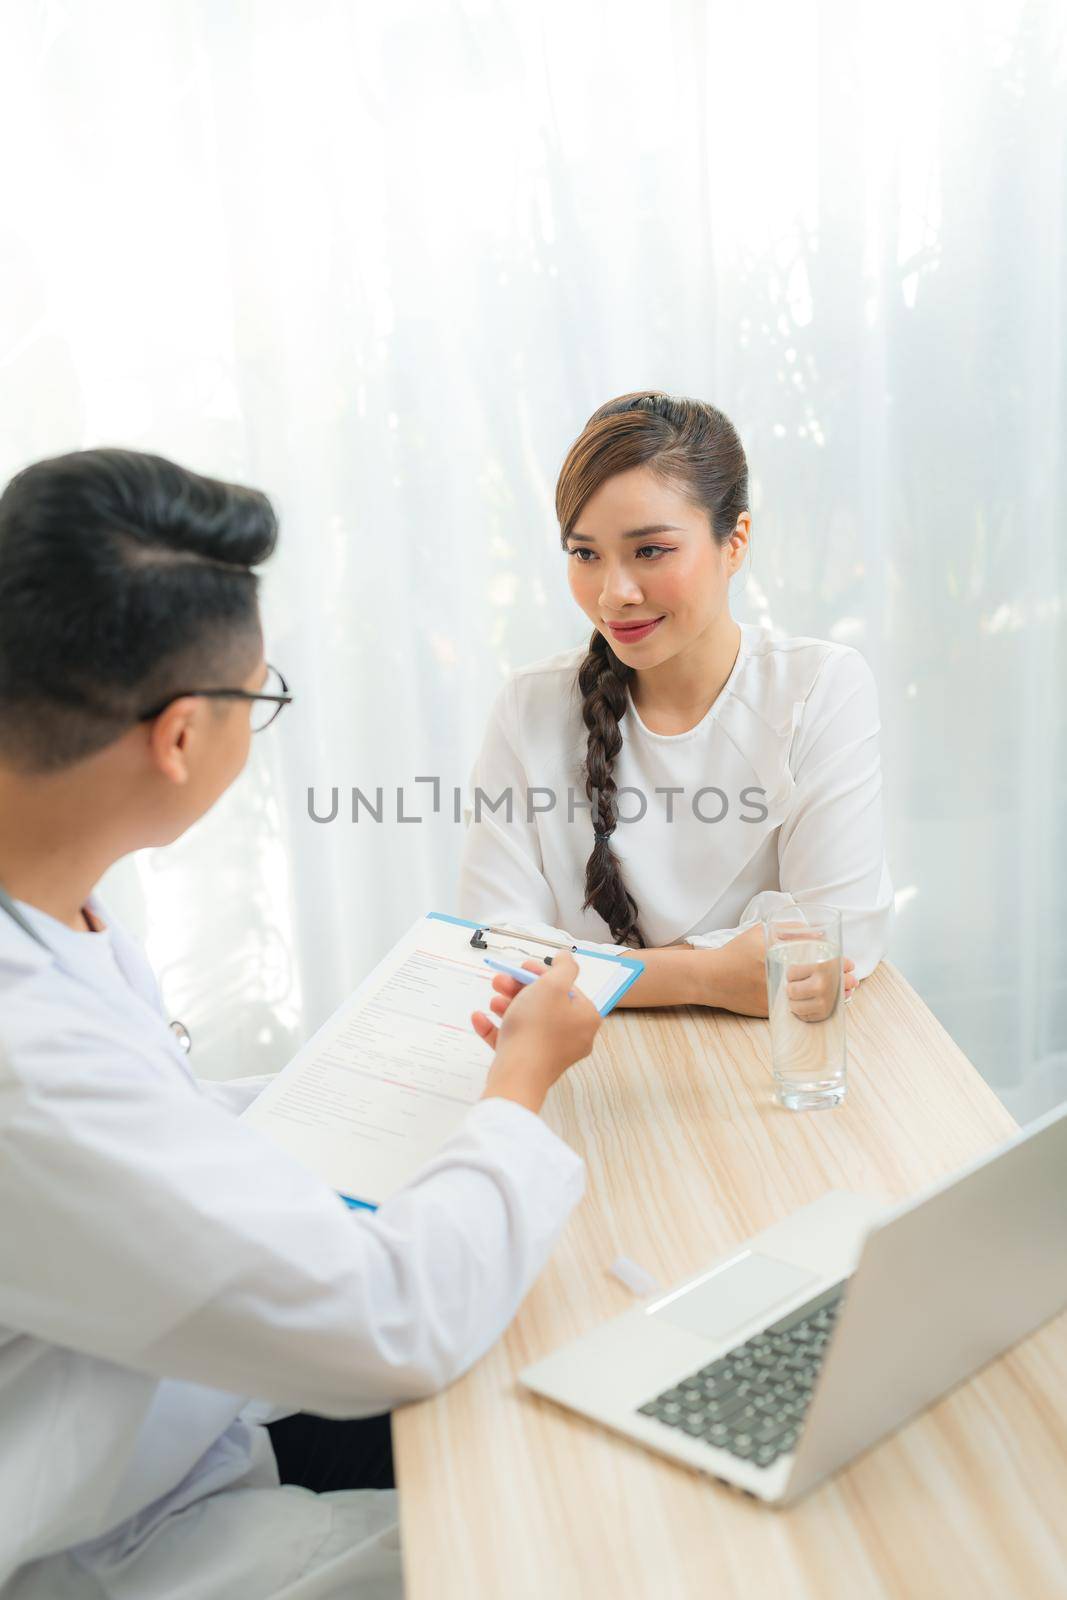 Woman patient consulting with doctor or psychiatrist on obstetric